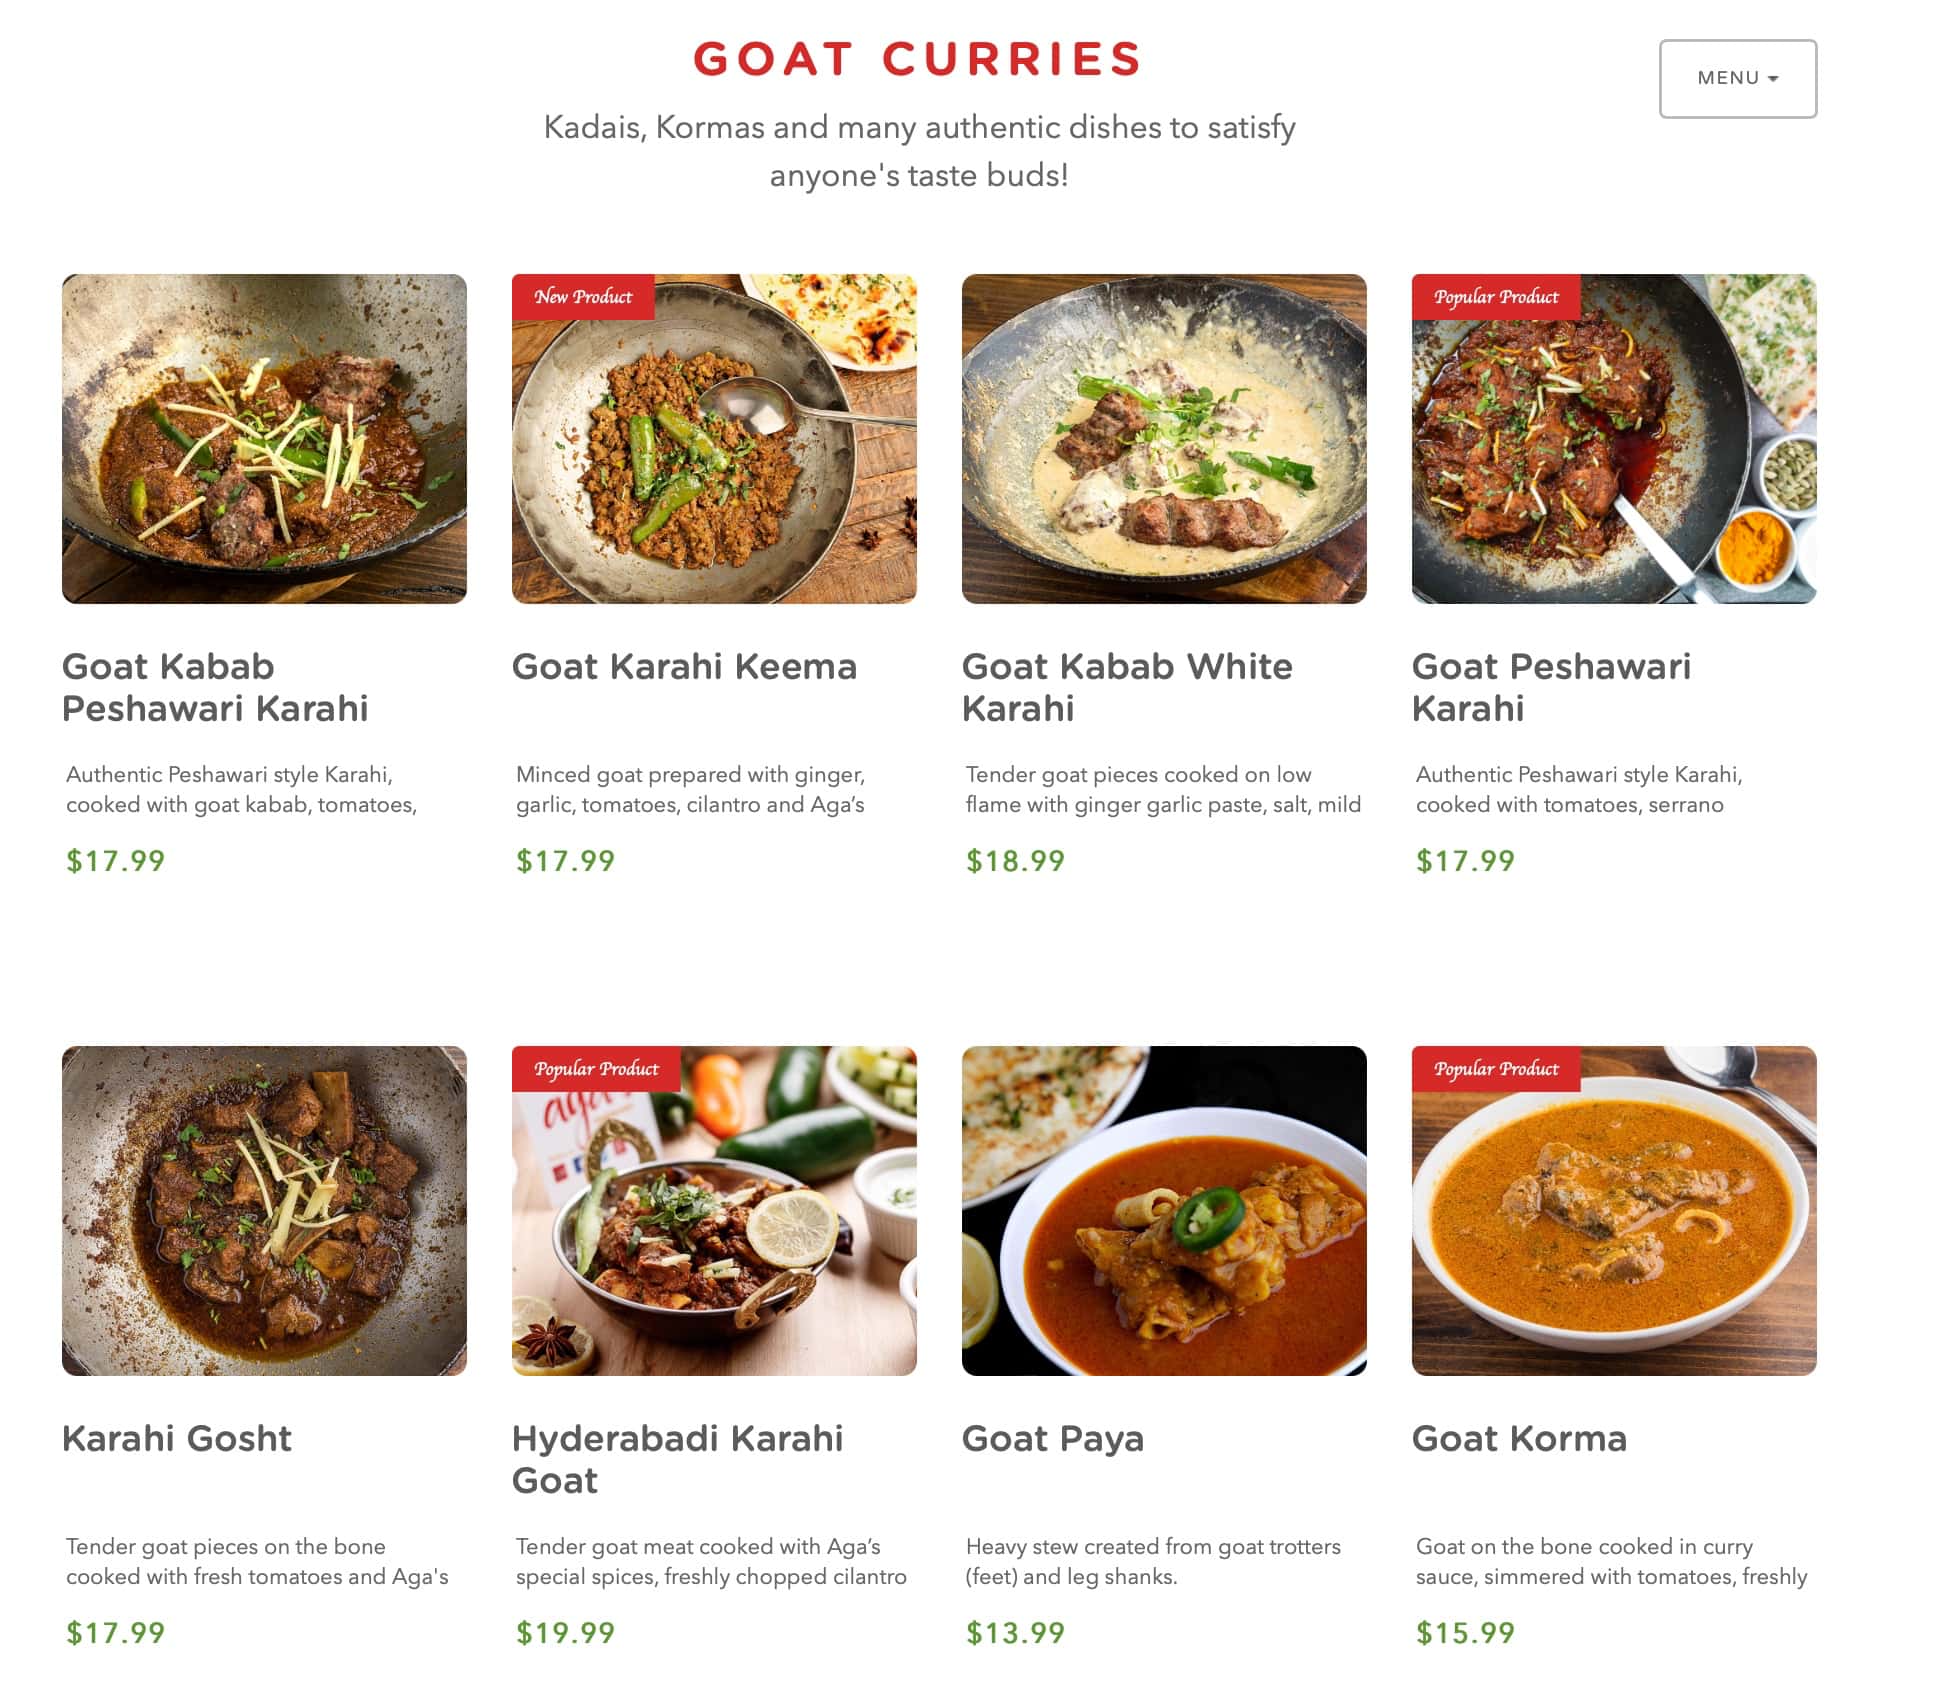 Aga's Restaurant and Catering Goat Curries Menu